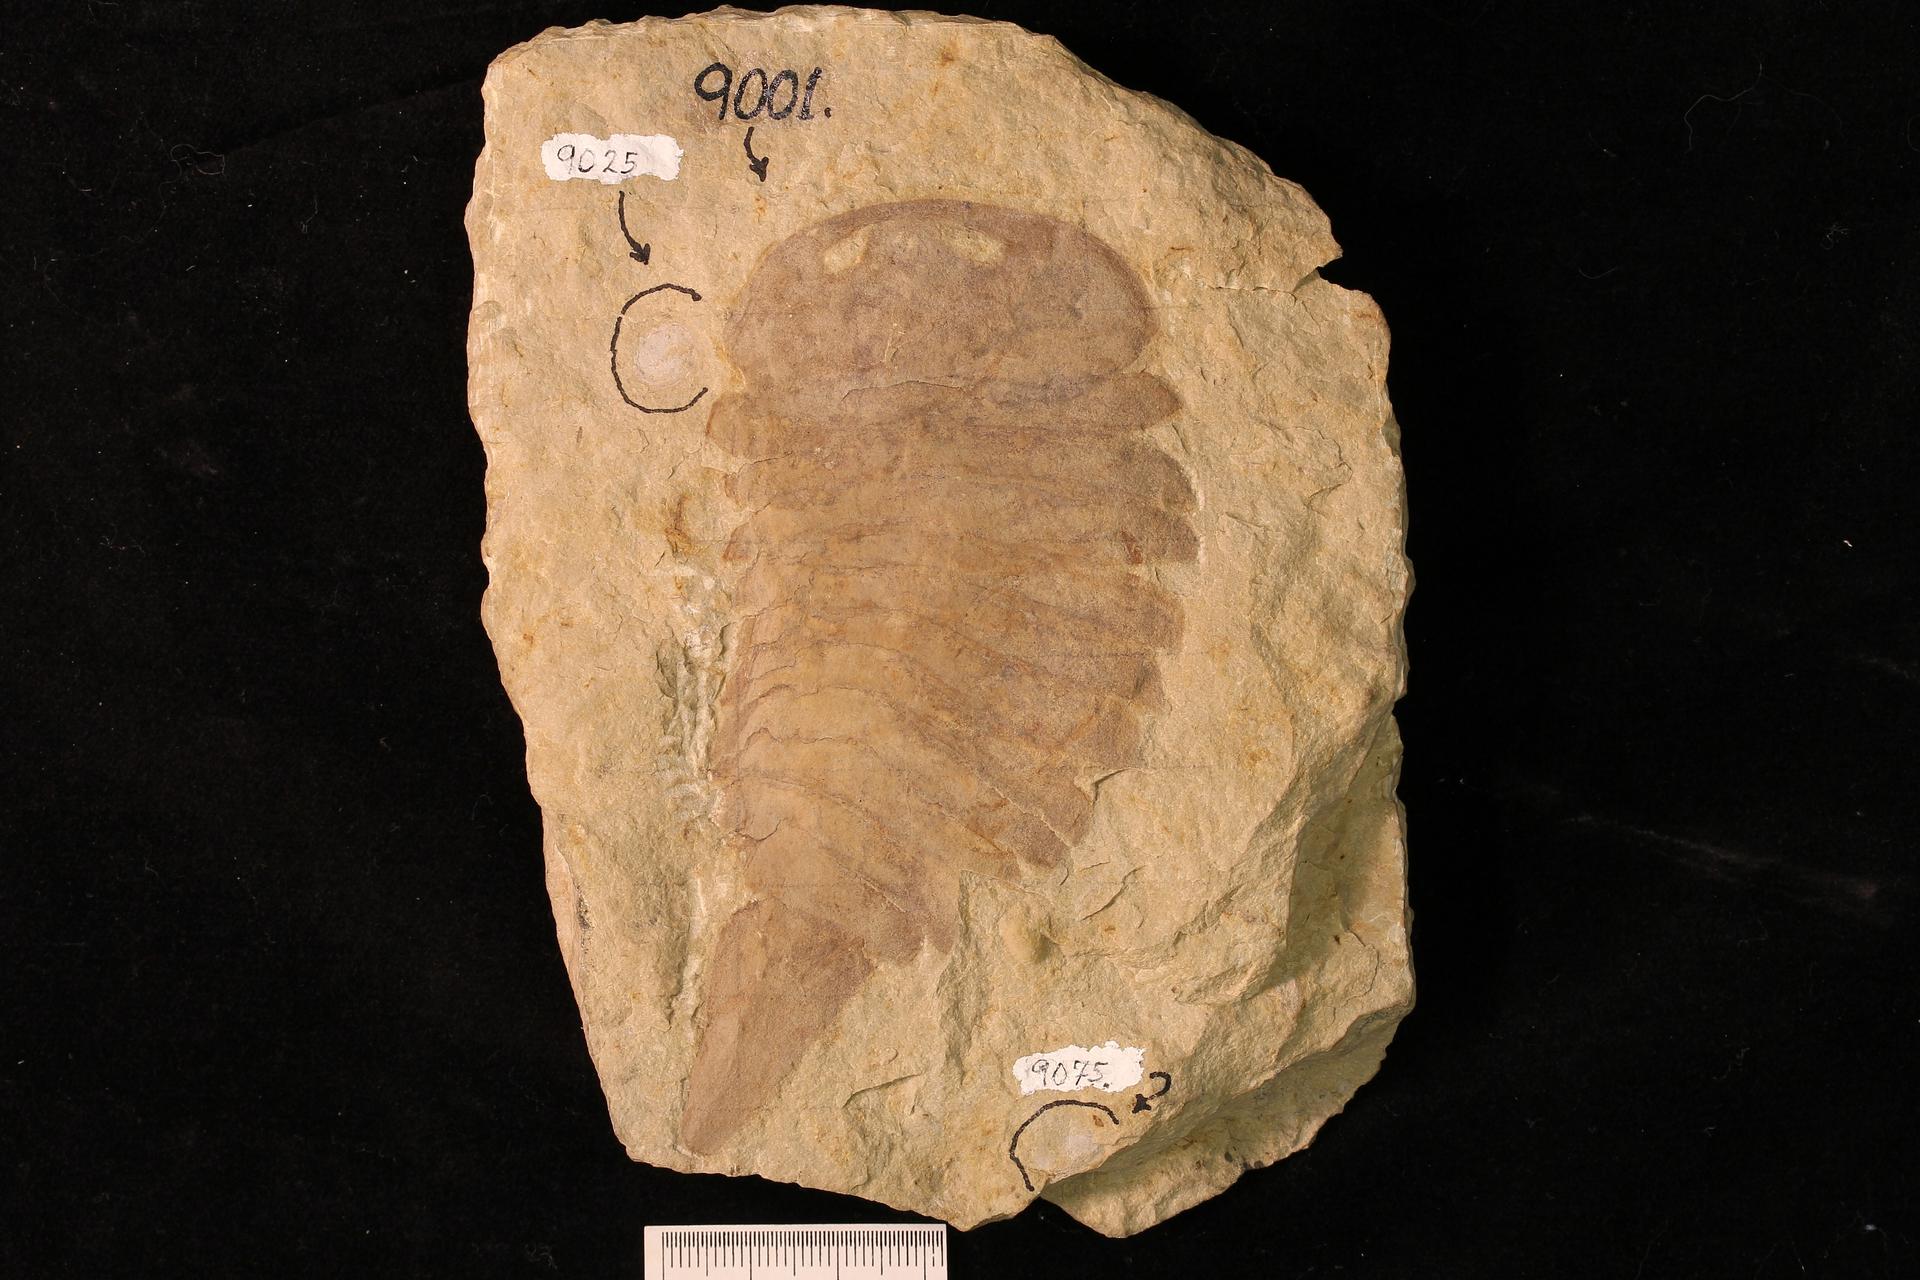 Photo of a fossil strabopid, a type of marine arthropod that looks somewhat like a trilobite.